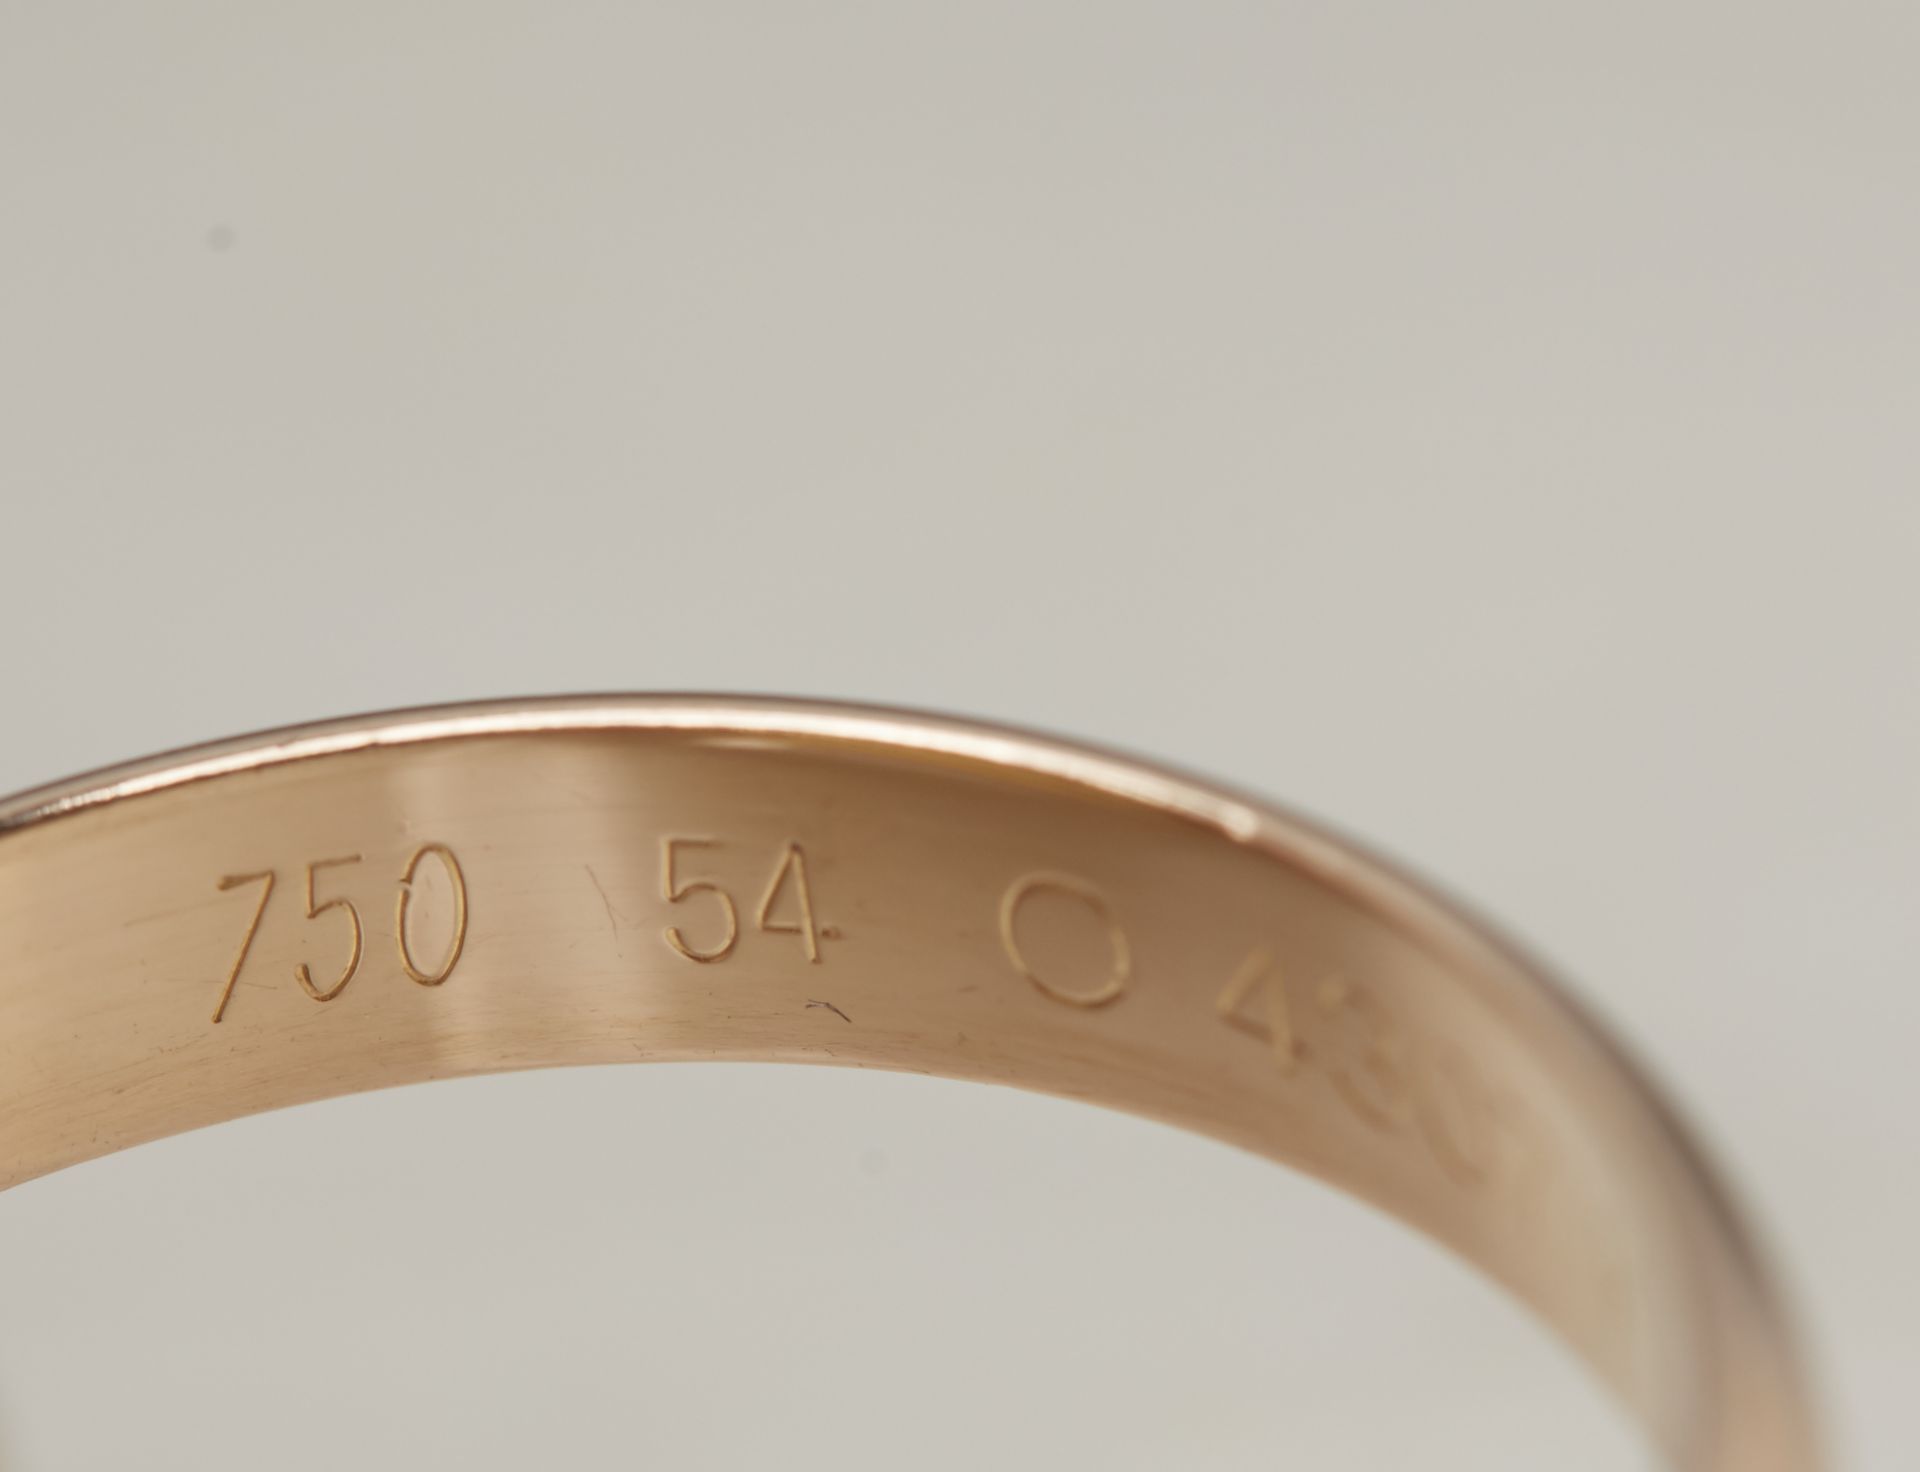 Cartier 18k Yellow, White & Rose Gold Trinity Ring - Image 4 of 18